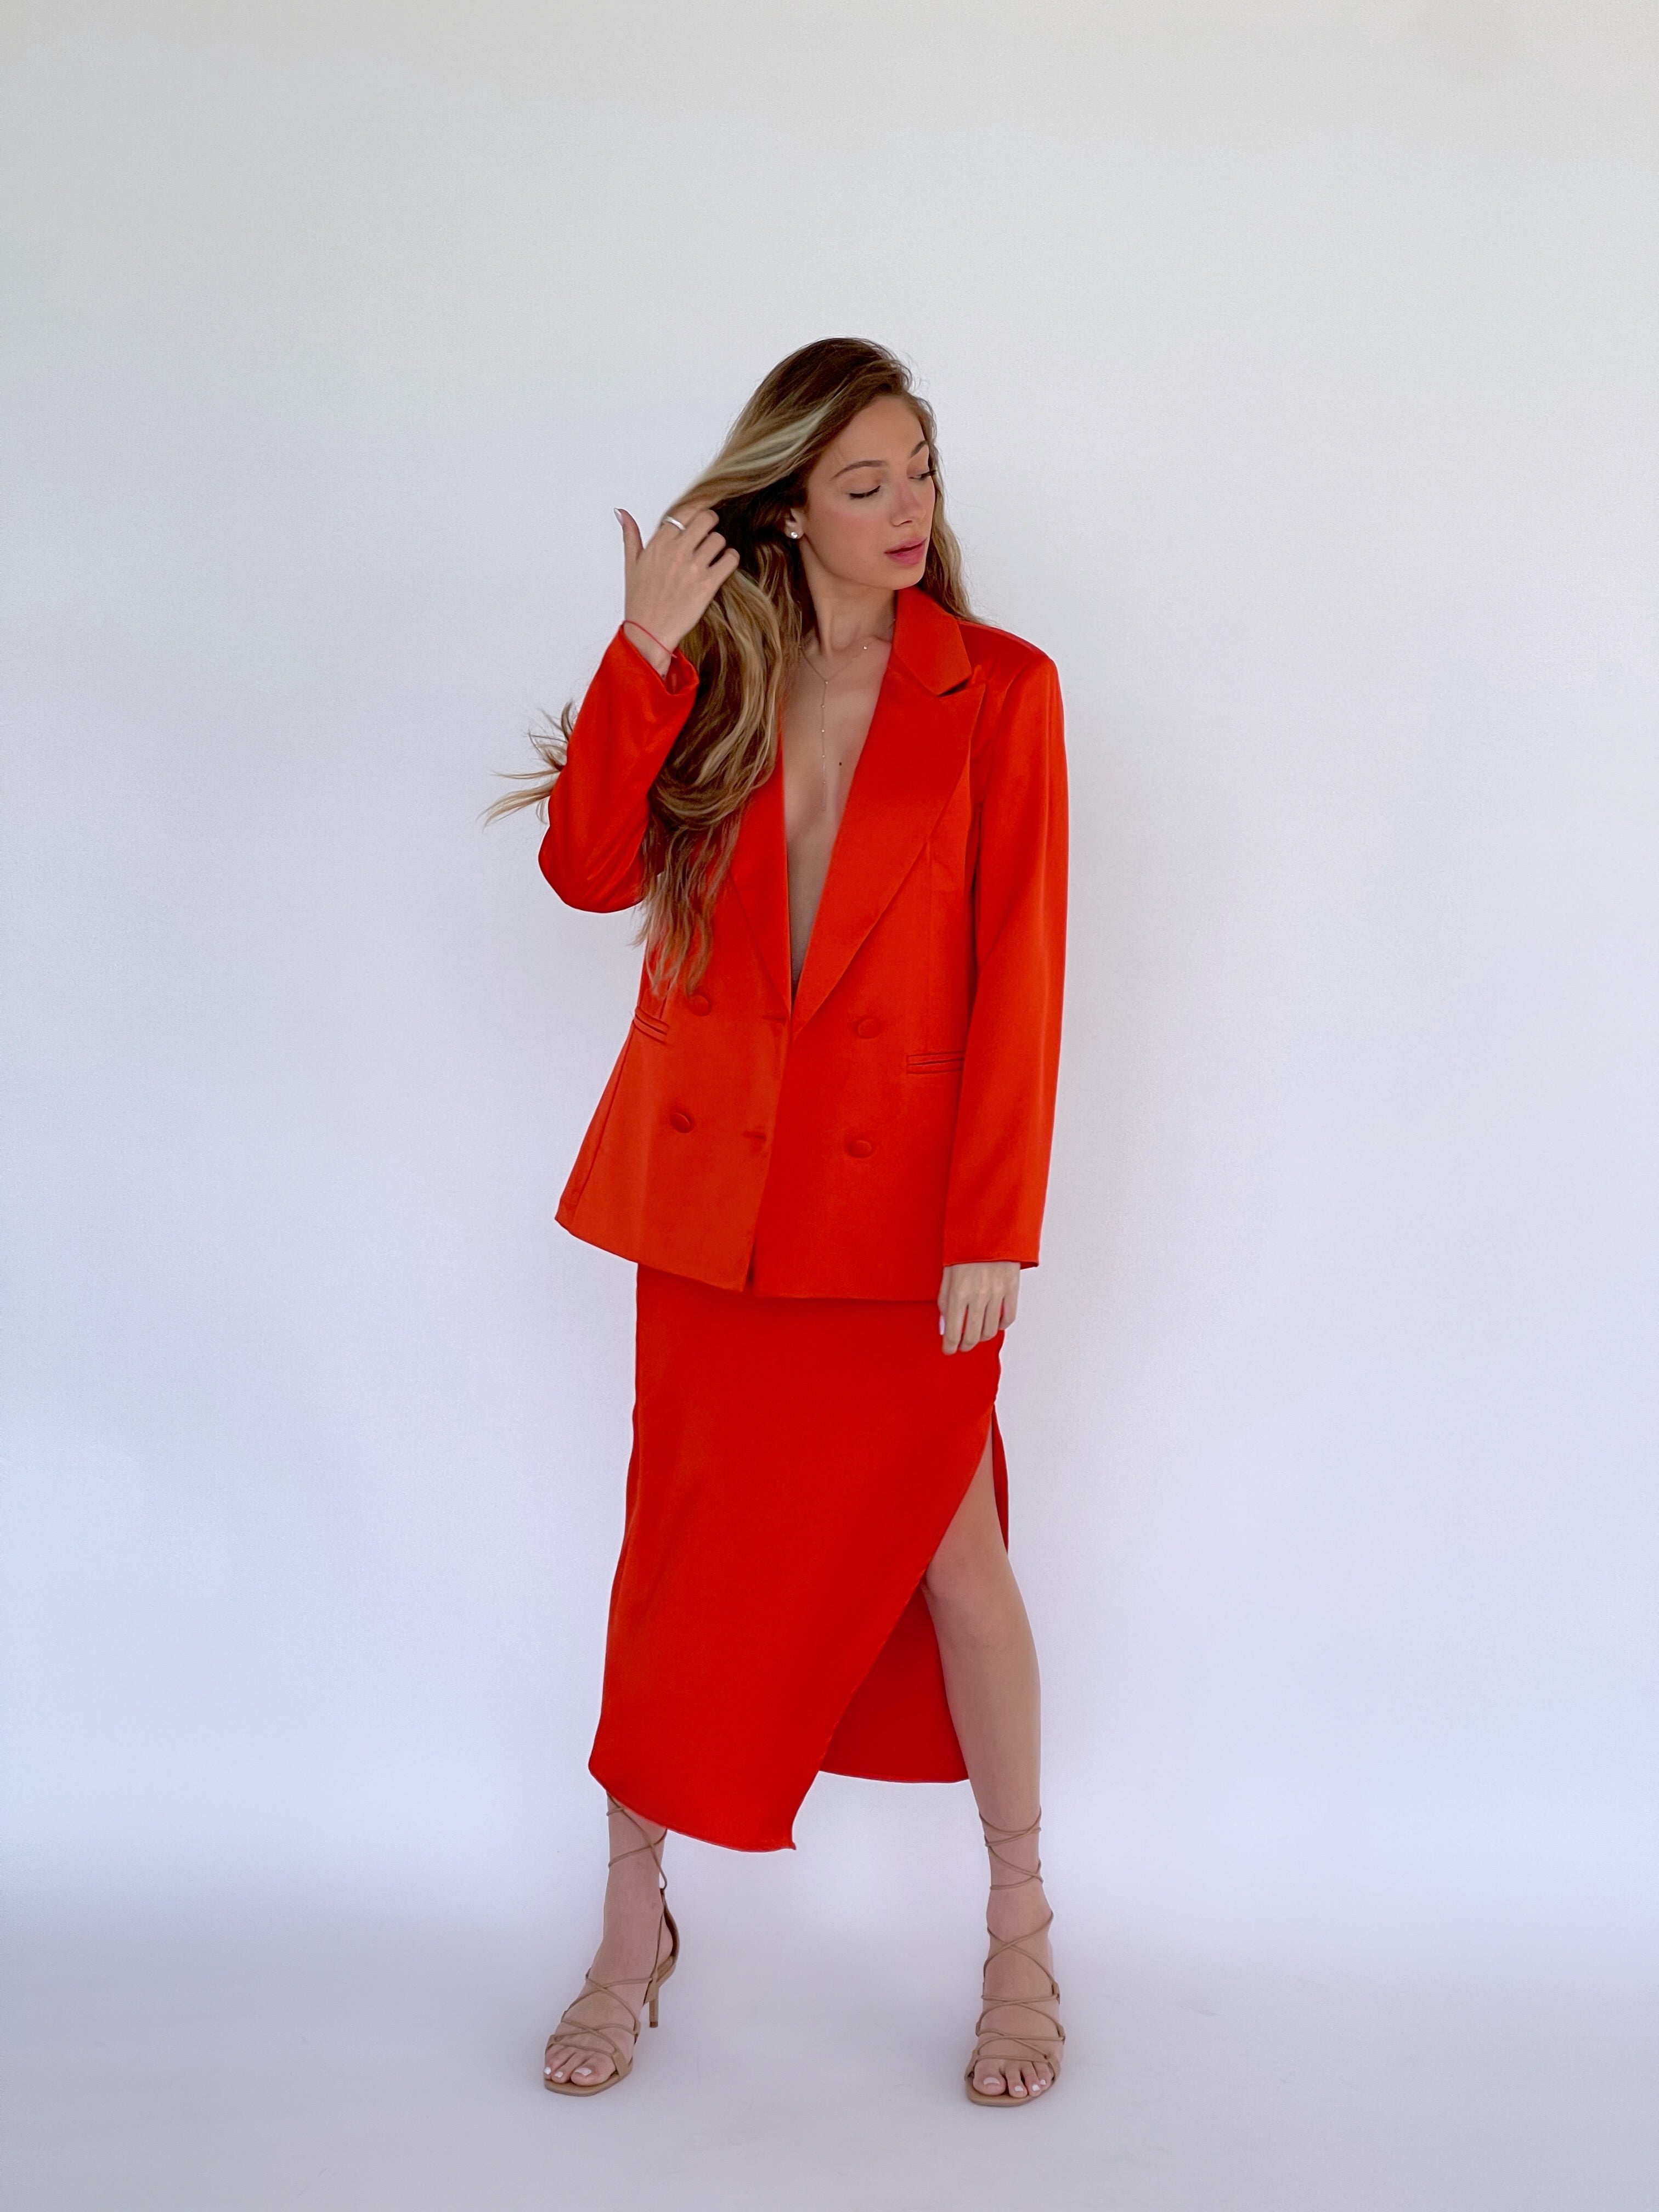 OVERSIZED SATIN BLAZER WITH MATCHING MIDI SKIRT IN RED - Set - LE TRÉ